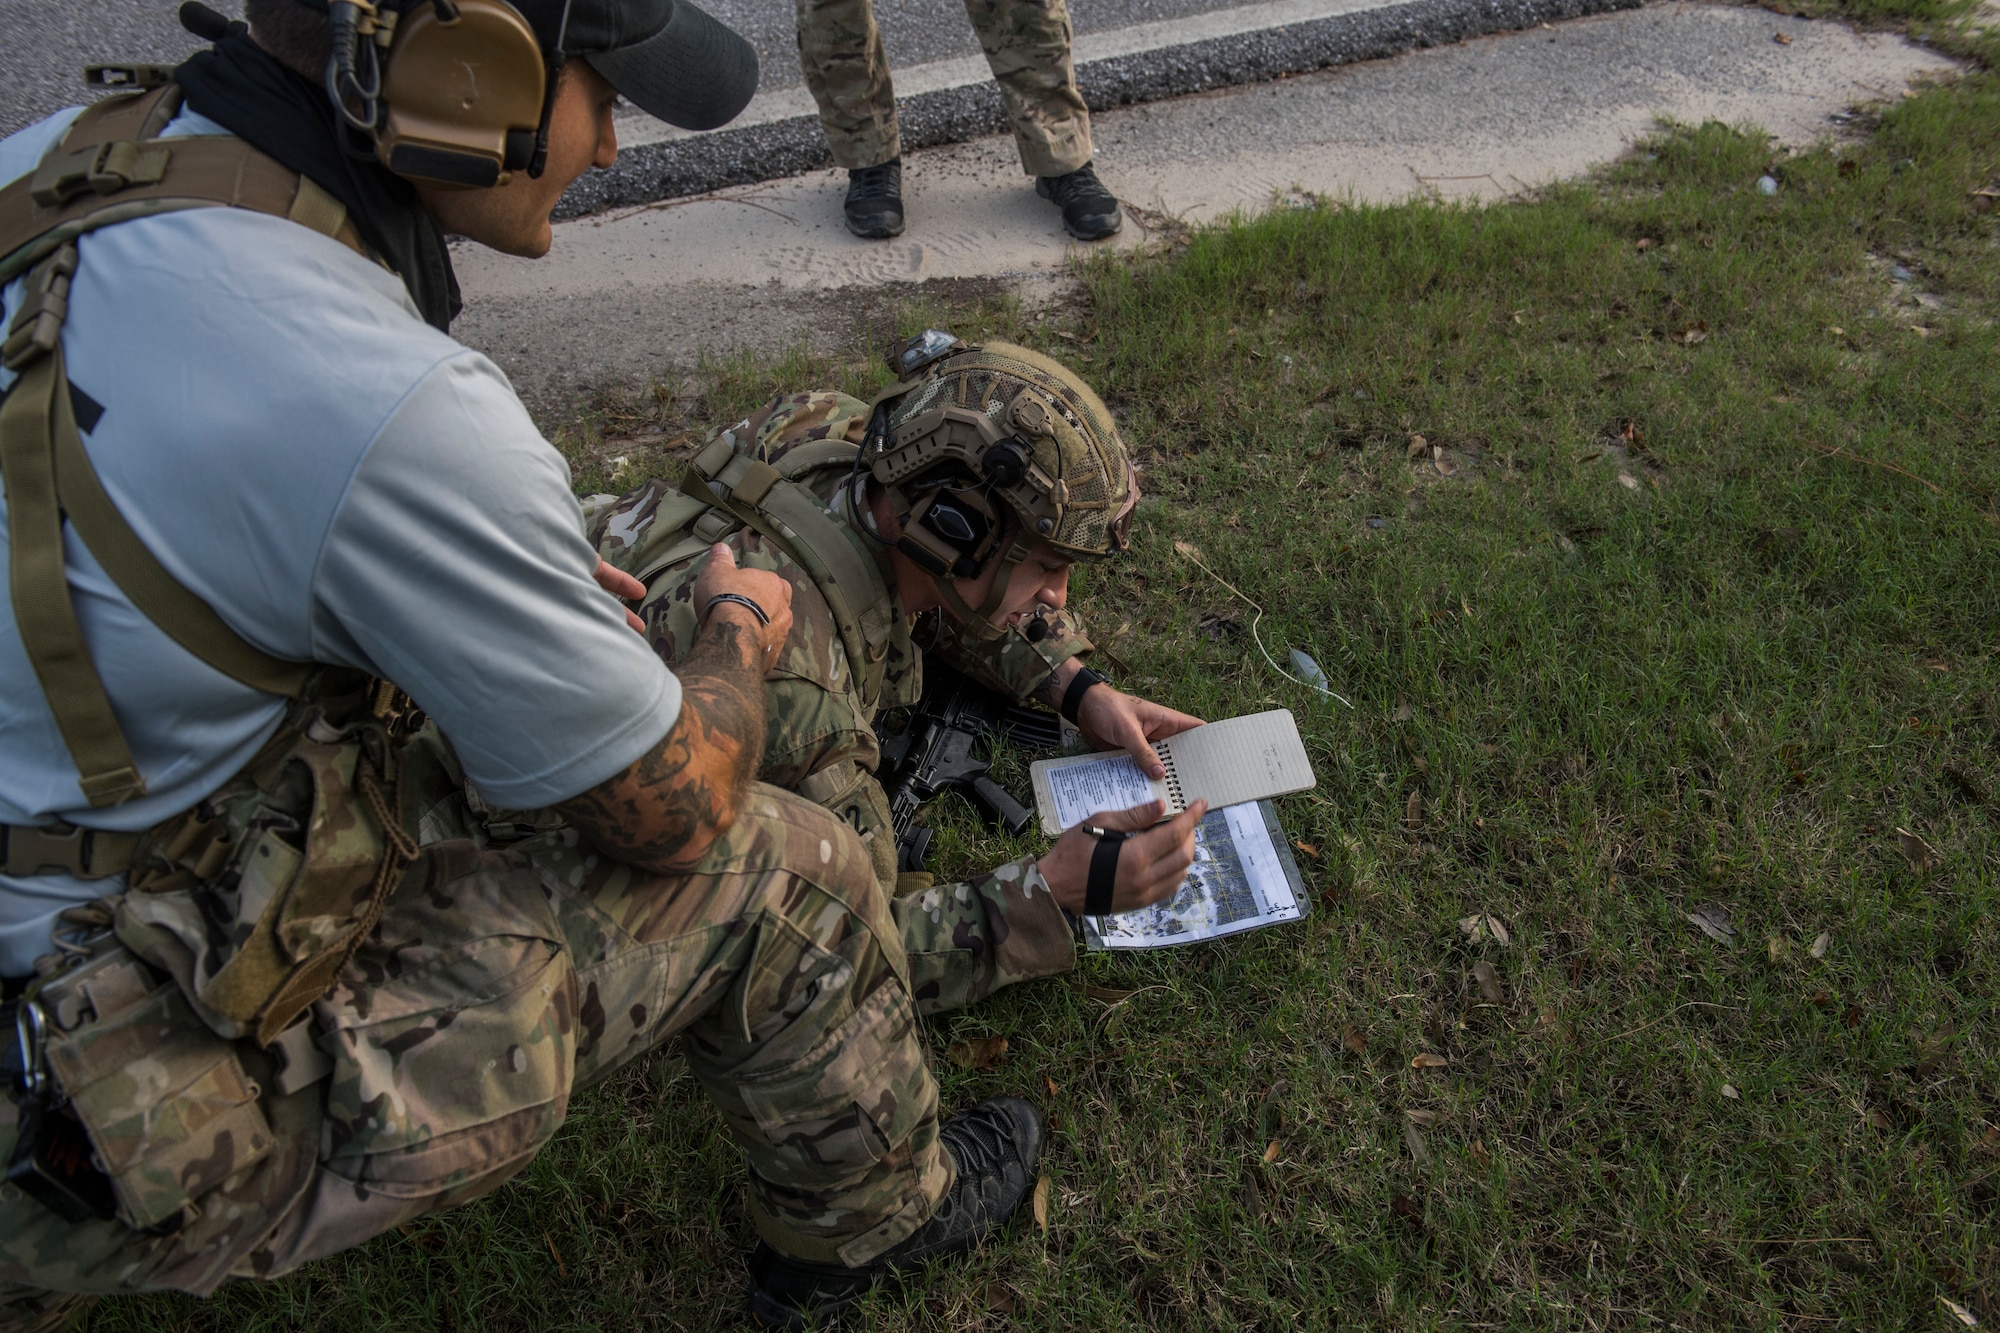 A pair of tactical air control party candidates participate in a call for fire scenario. One crouches on the ground looking at a map while a light-blue shirted cadre member kneels beside him and talks on his headset.